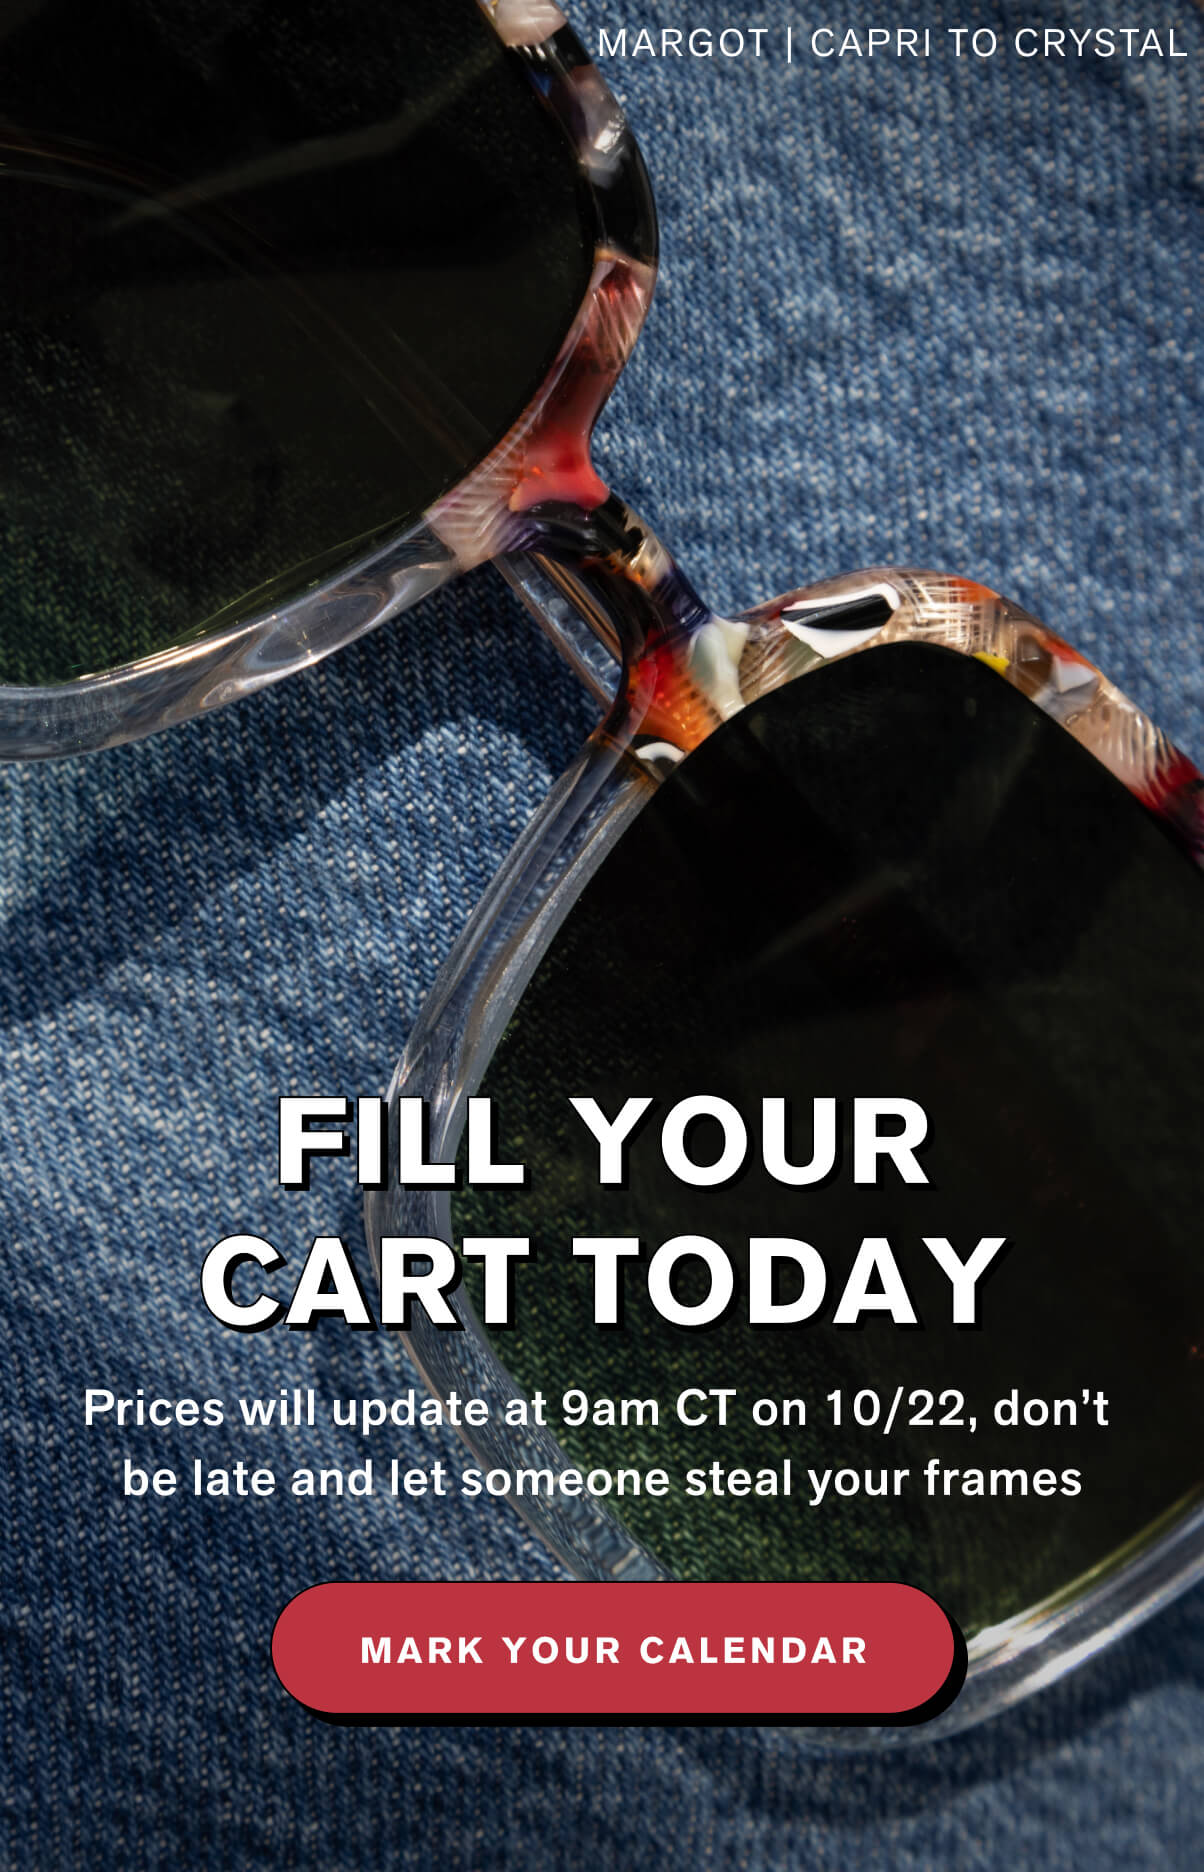 FILL YOUR CART TODAY  Prices will update at 9am CT on 10/22, don't be late and let someone steal you frames.  MARK YOUR CALENDAR